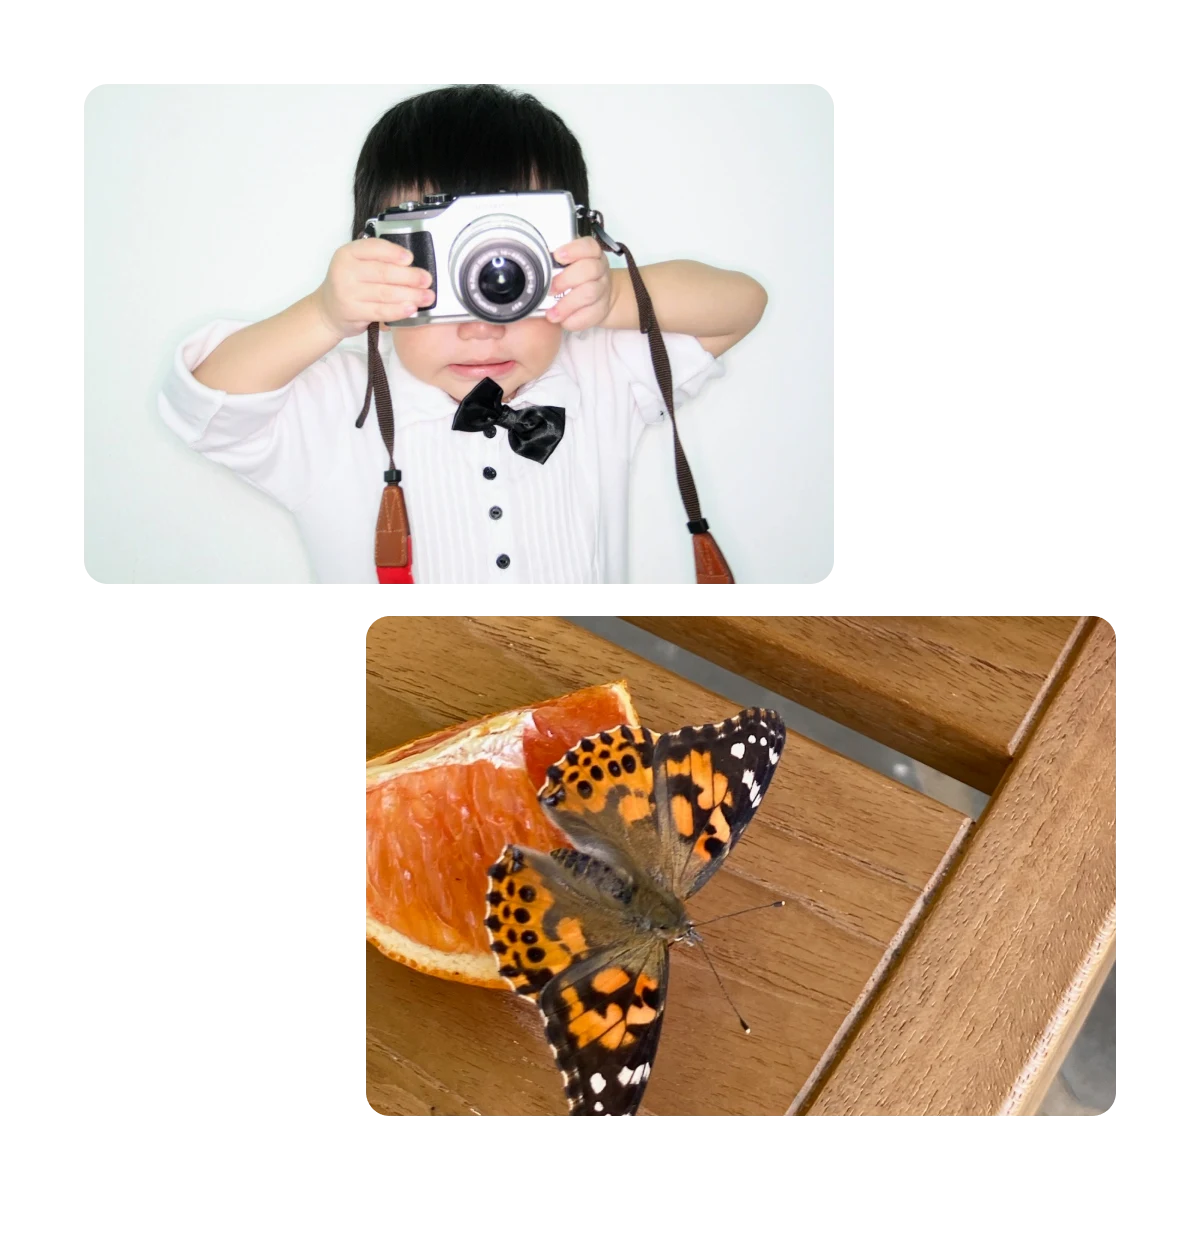 Two pins, young boy with camera, butterflies on orange slices